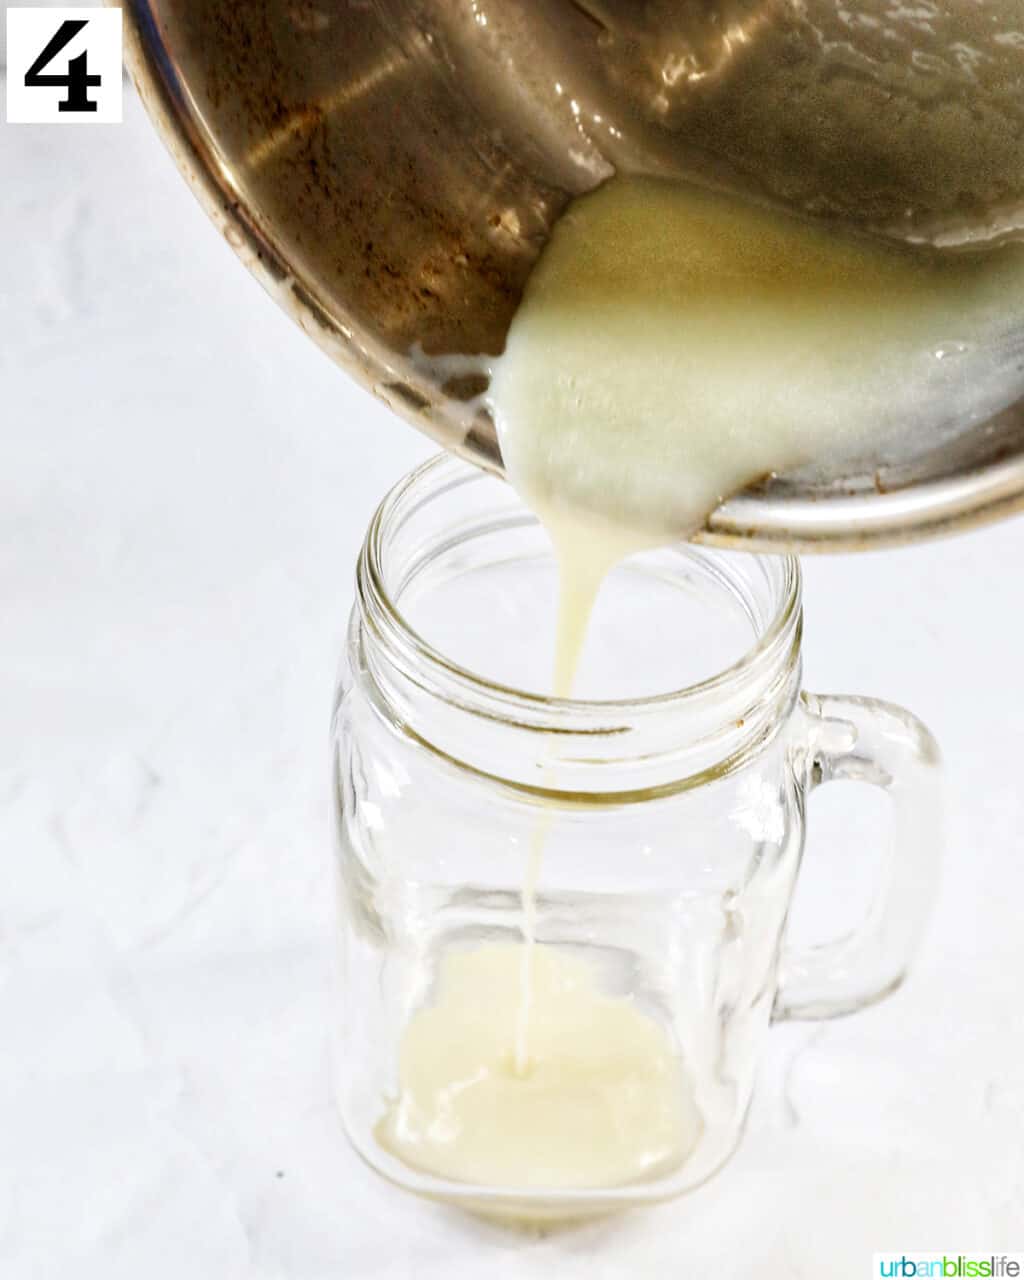 Pouring melted white chocolate into a clear glass mug.